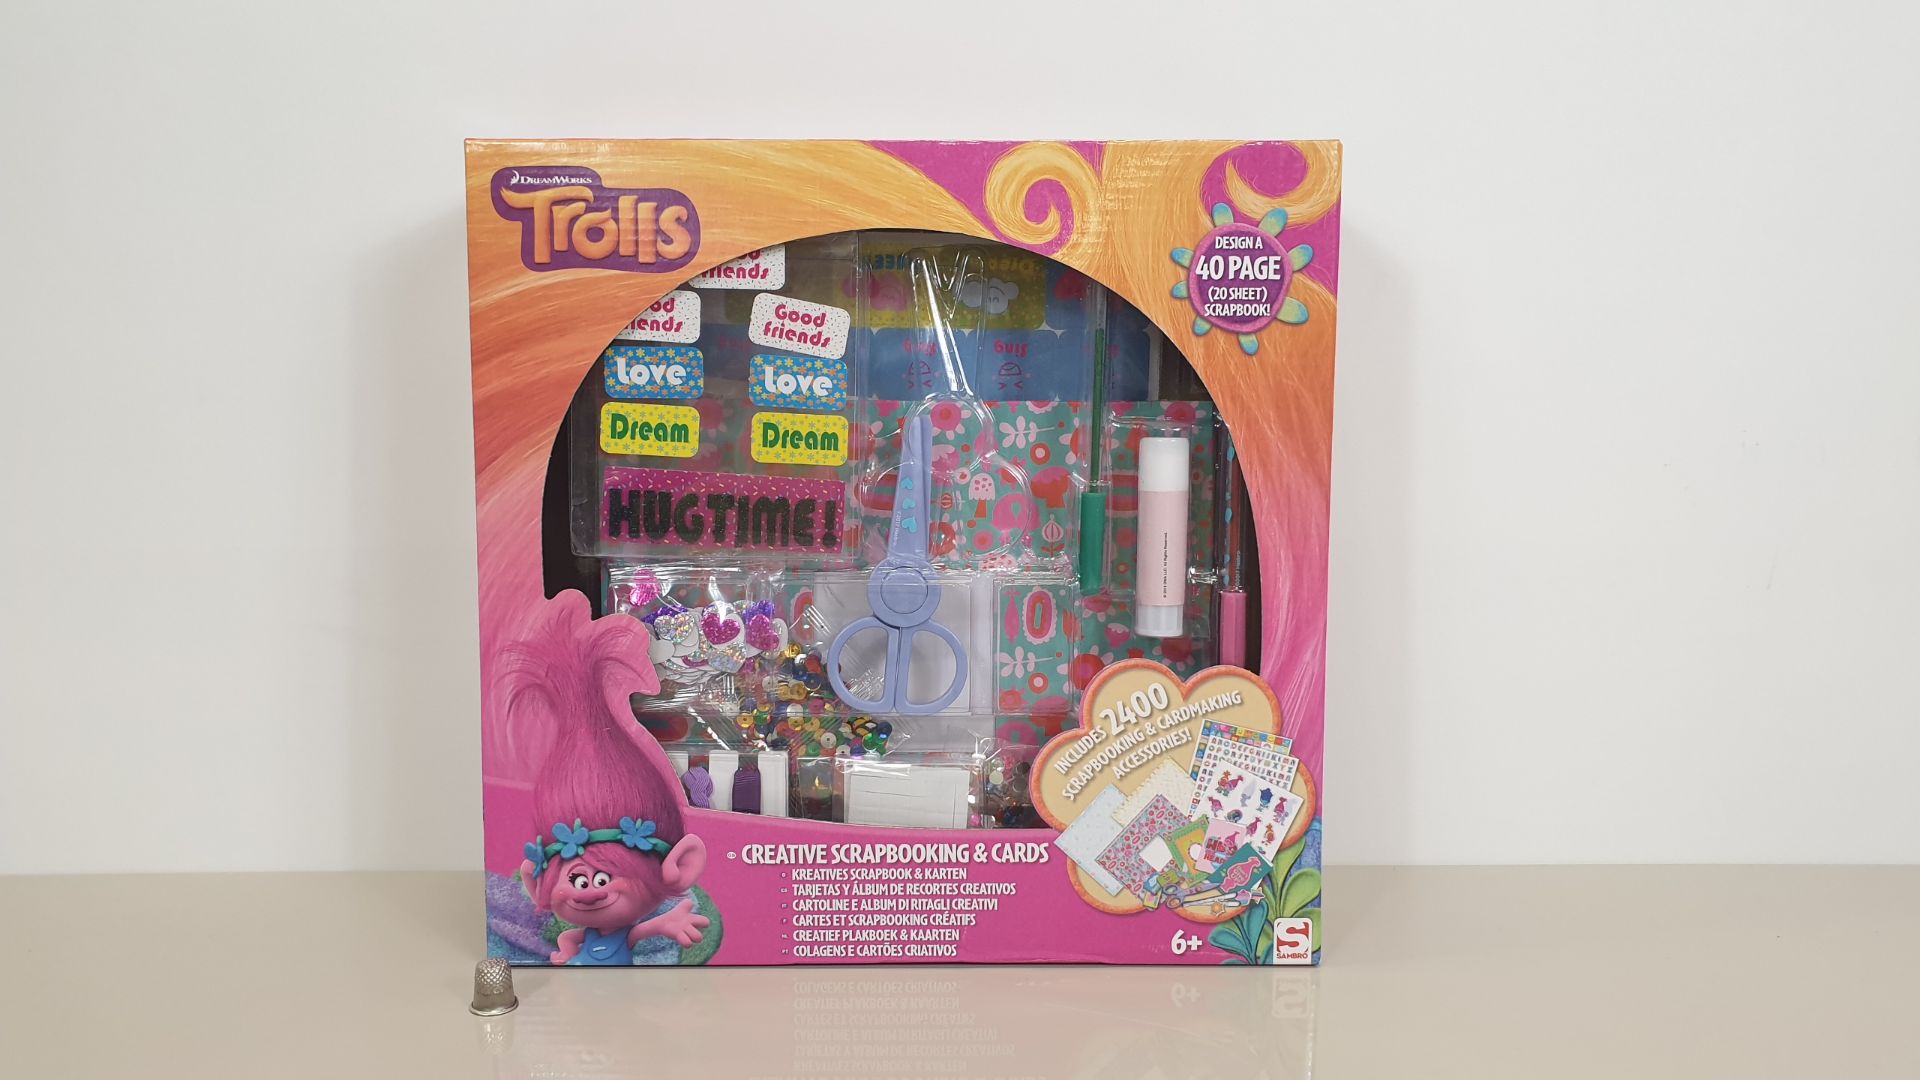 18 X BRAND NEW DREAMWORKS TROLLS CREATIVE SCRAPBOOKING AND CARDS (INCLUDES 2400 SCRAPBOOK AND CARD